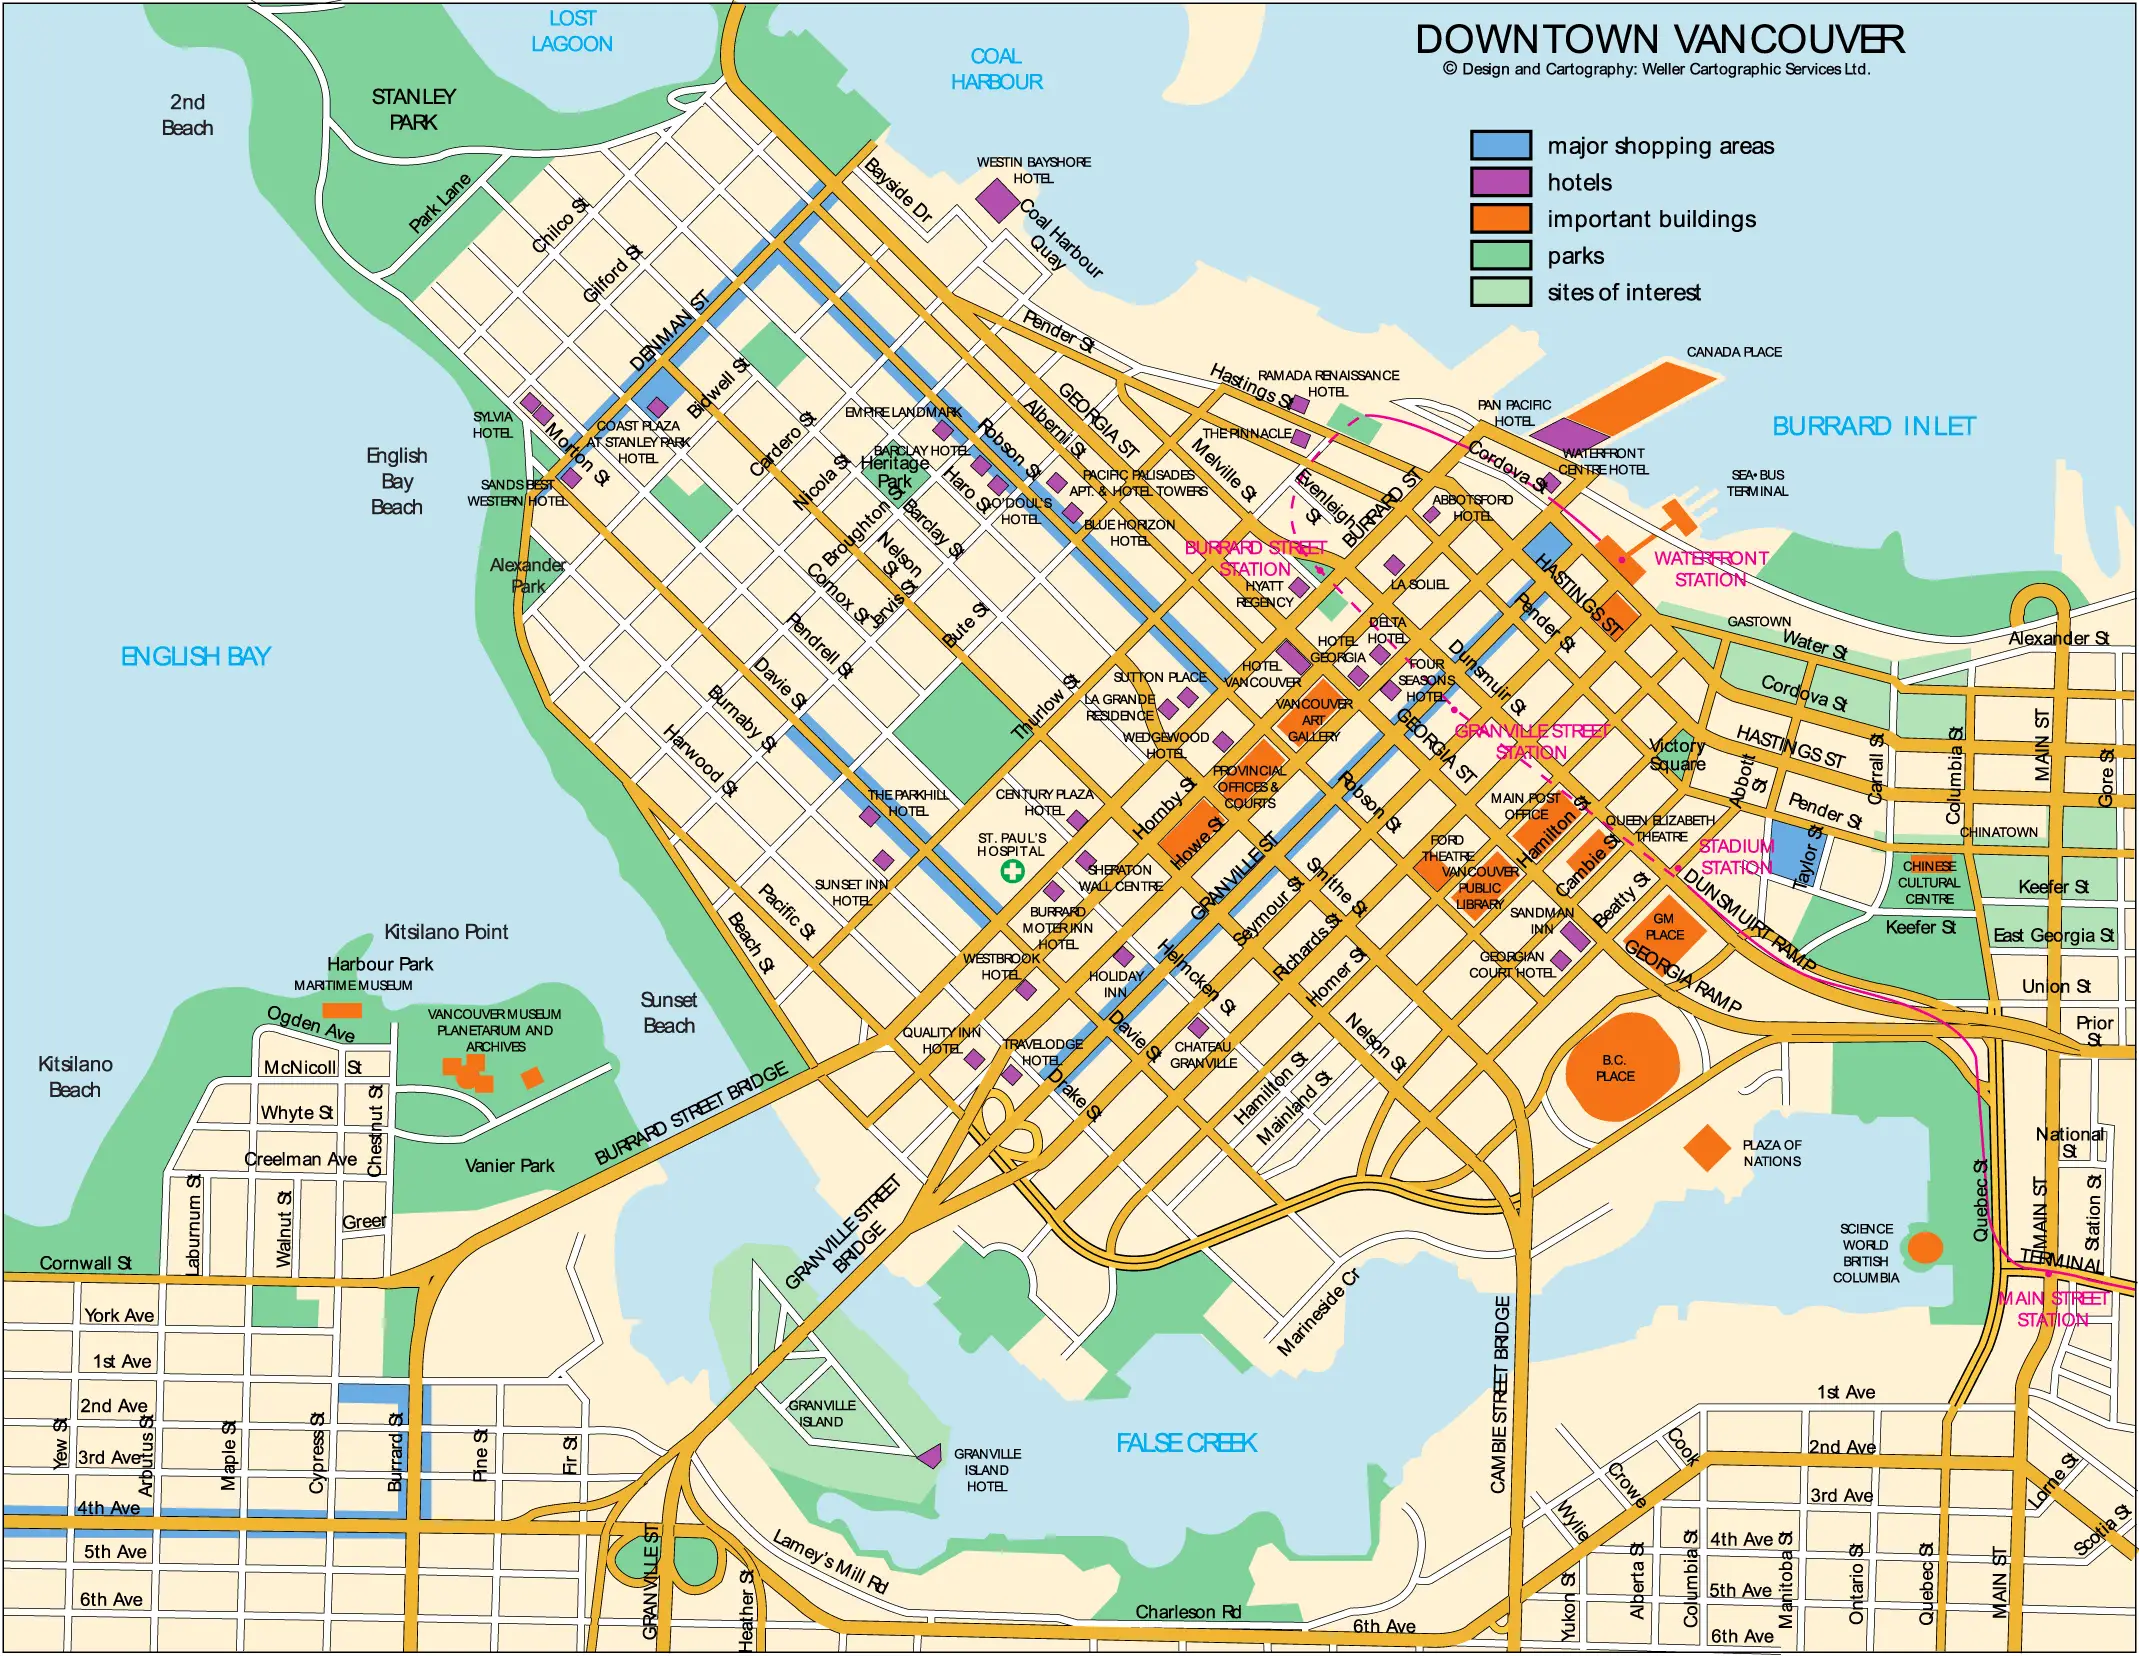 Downtown of Vancouver Map - Mapsof.net